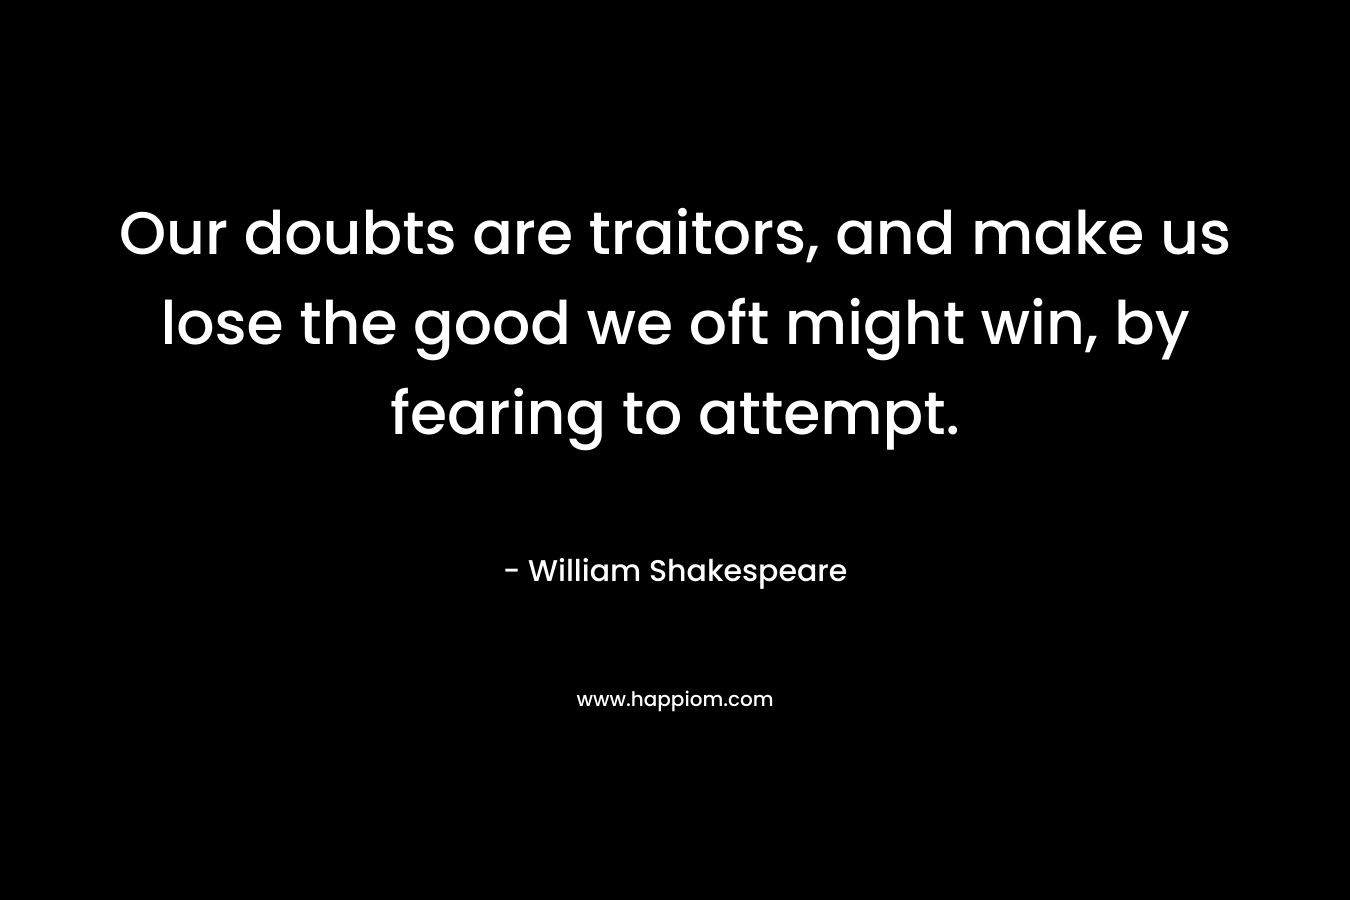 Our doubts are traitors, and make us lose the good we oft might win, by fearing to attempt. – William Shakespeare